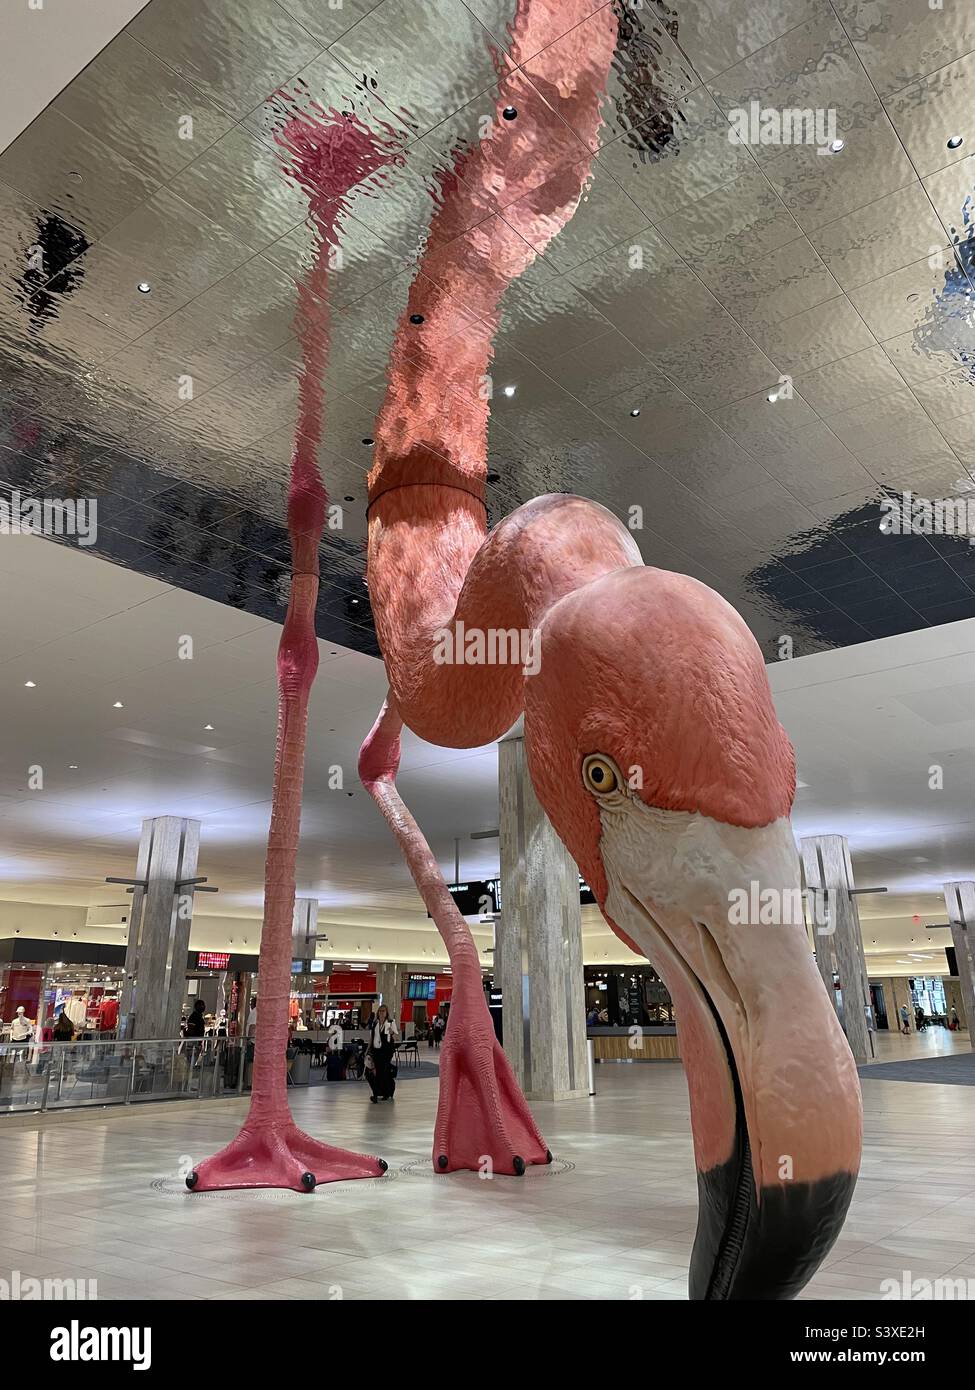 Tampa FL airport- a  Flamingo’s different view! Stock Photo